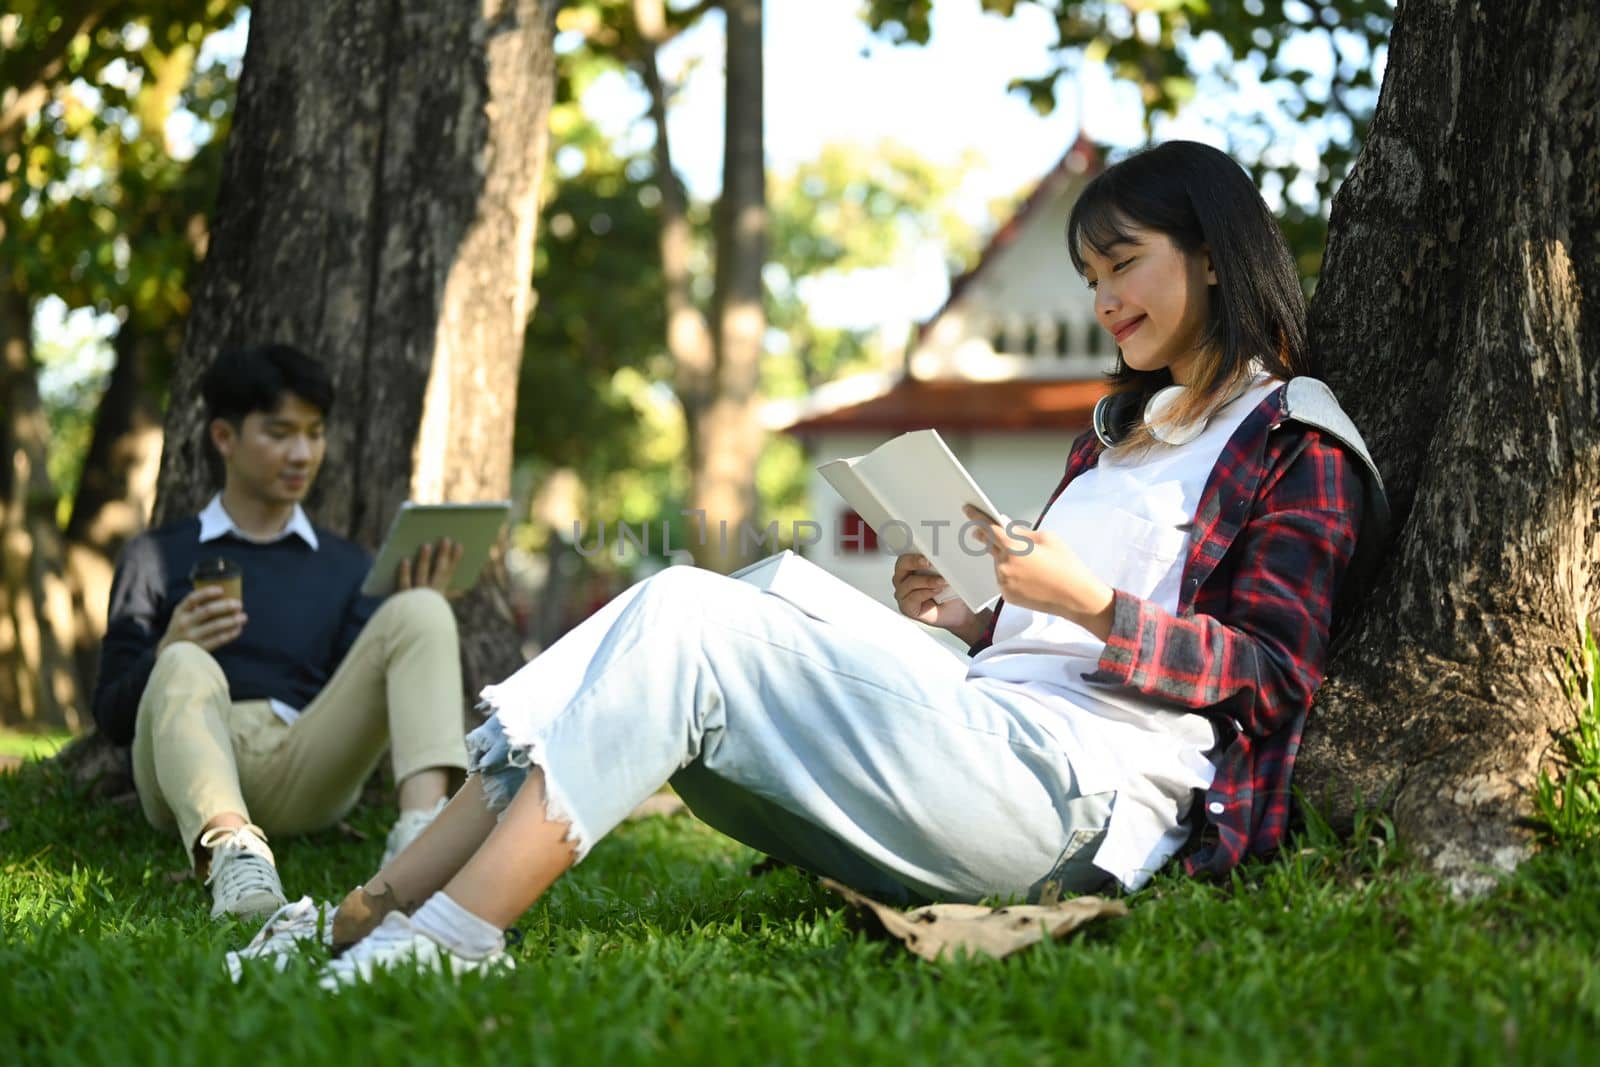 Smiling young woman sitting on lawn with friends and reading book. Education, learning, technology and lifestyle concept.